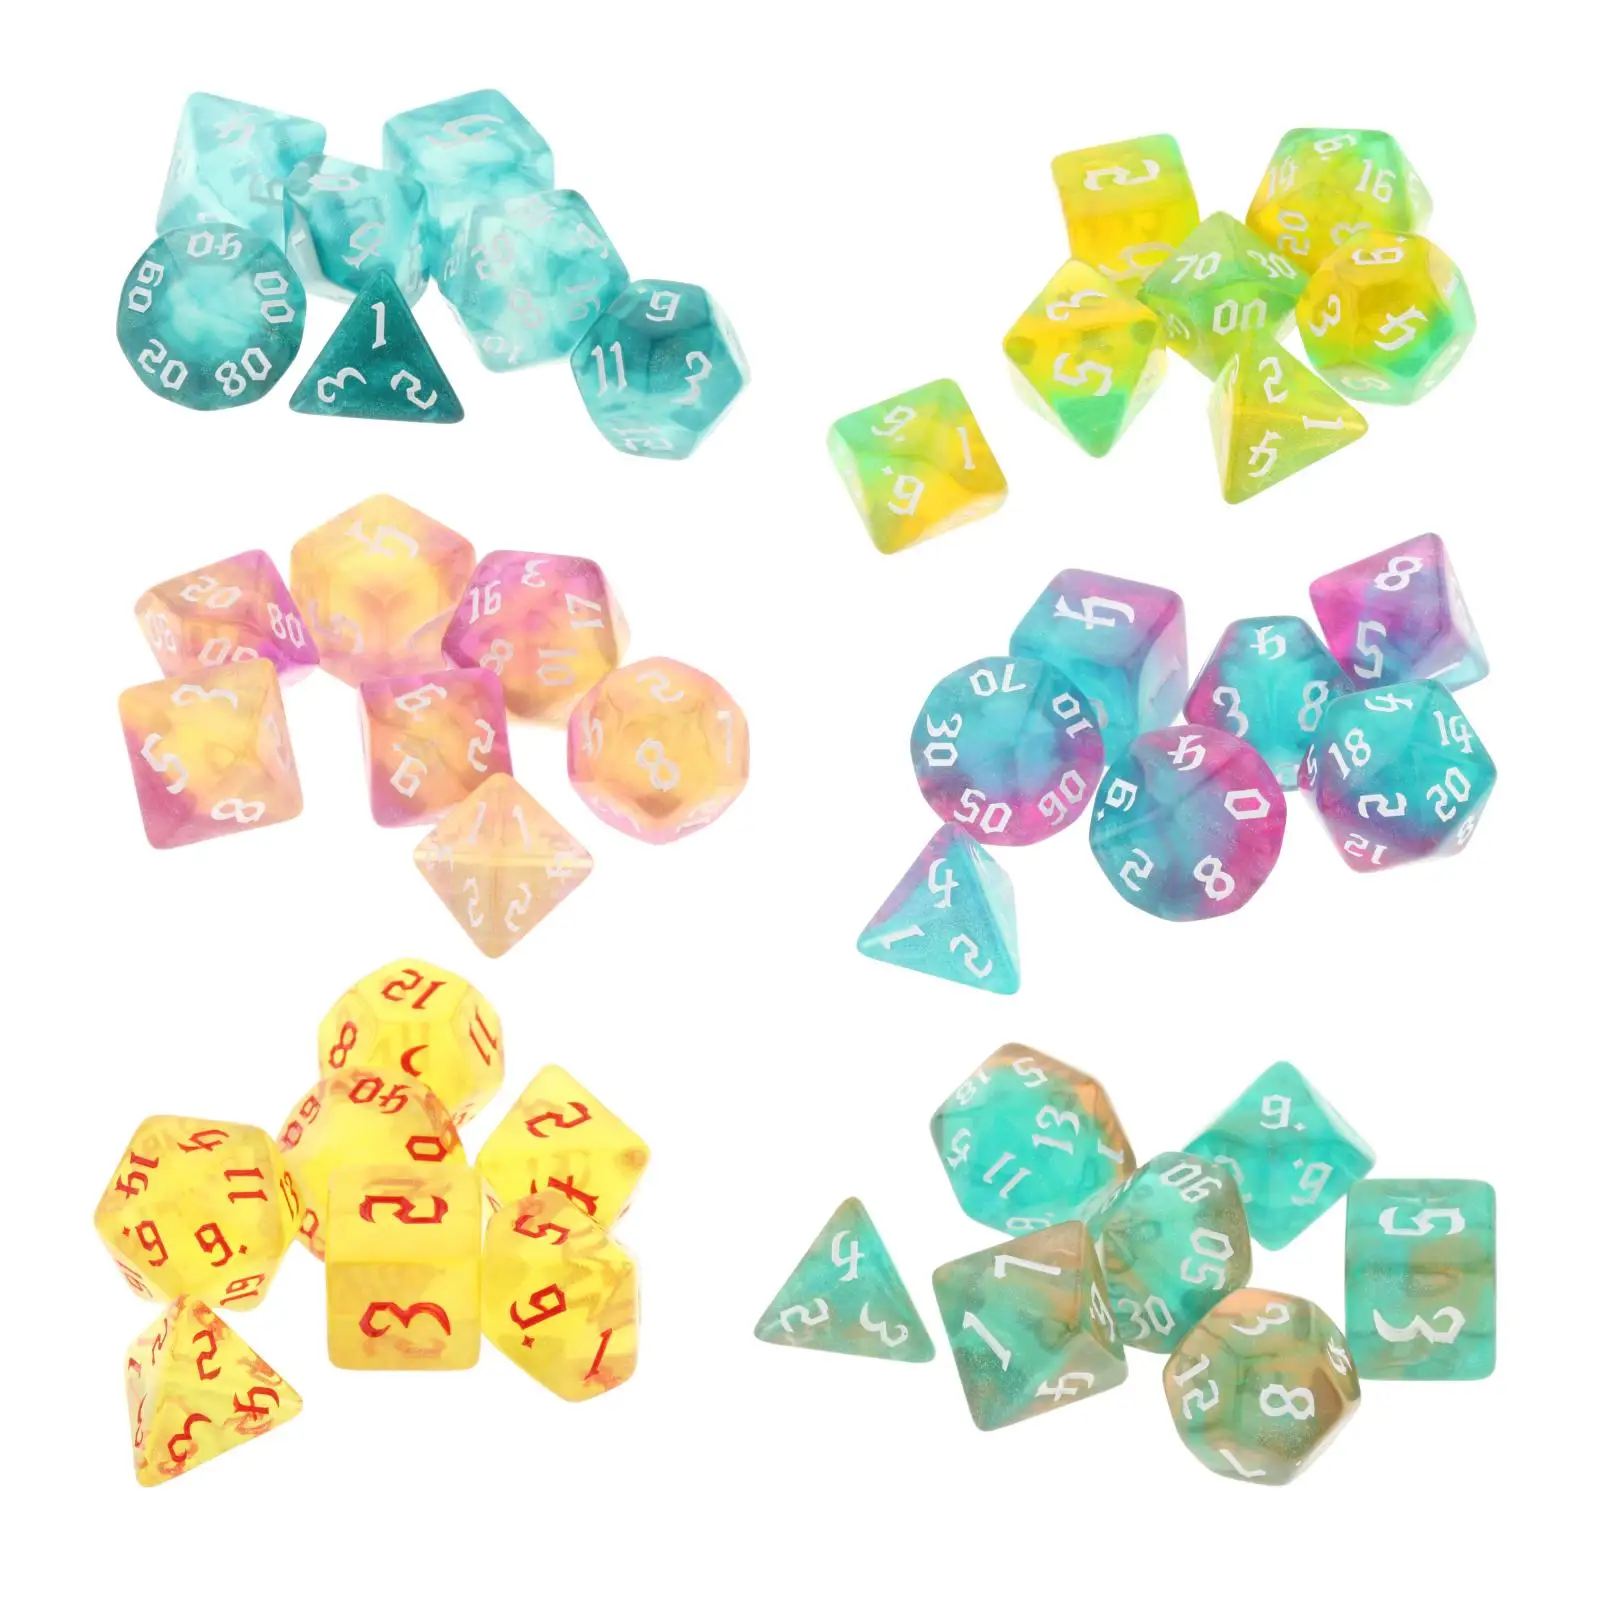 7pieces Multi-Side Acrylic Dice Set Dice Game Party Family Games Accessaries